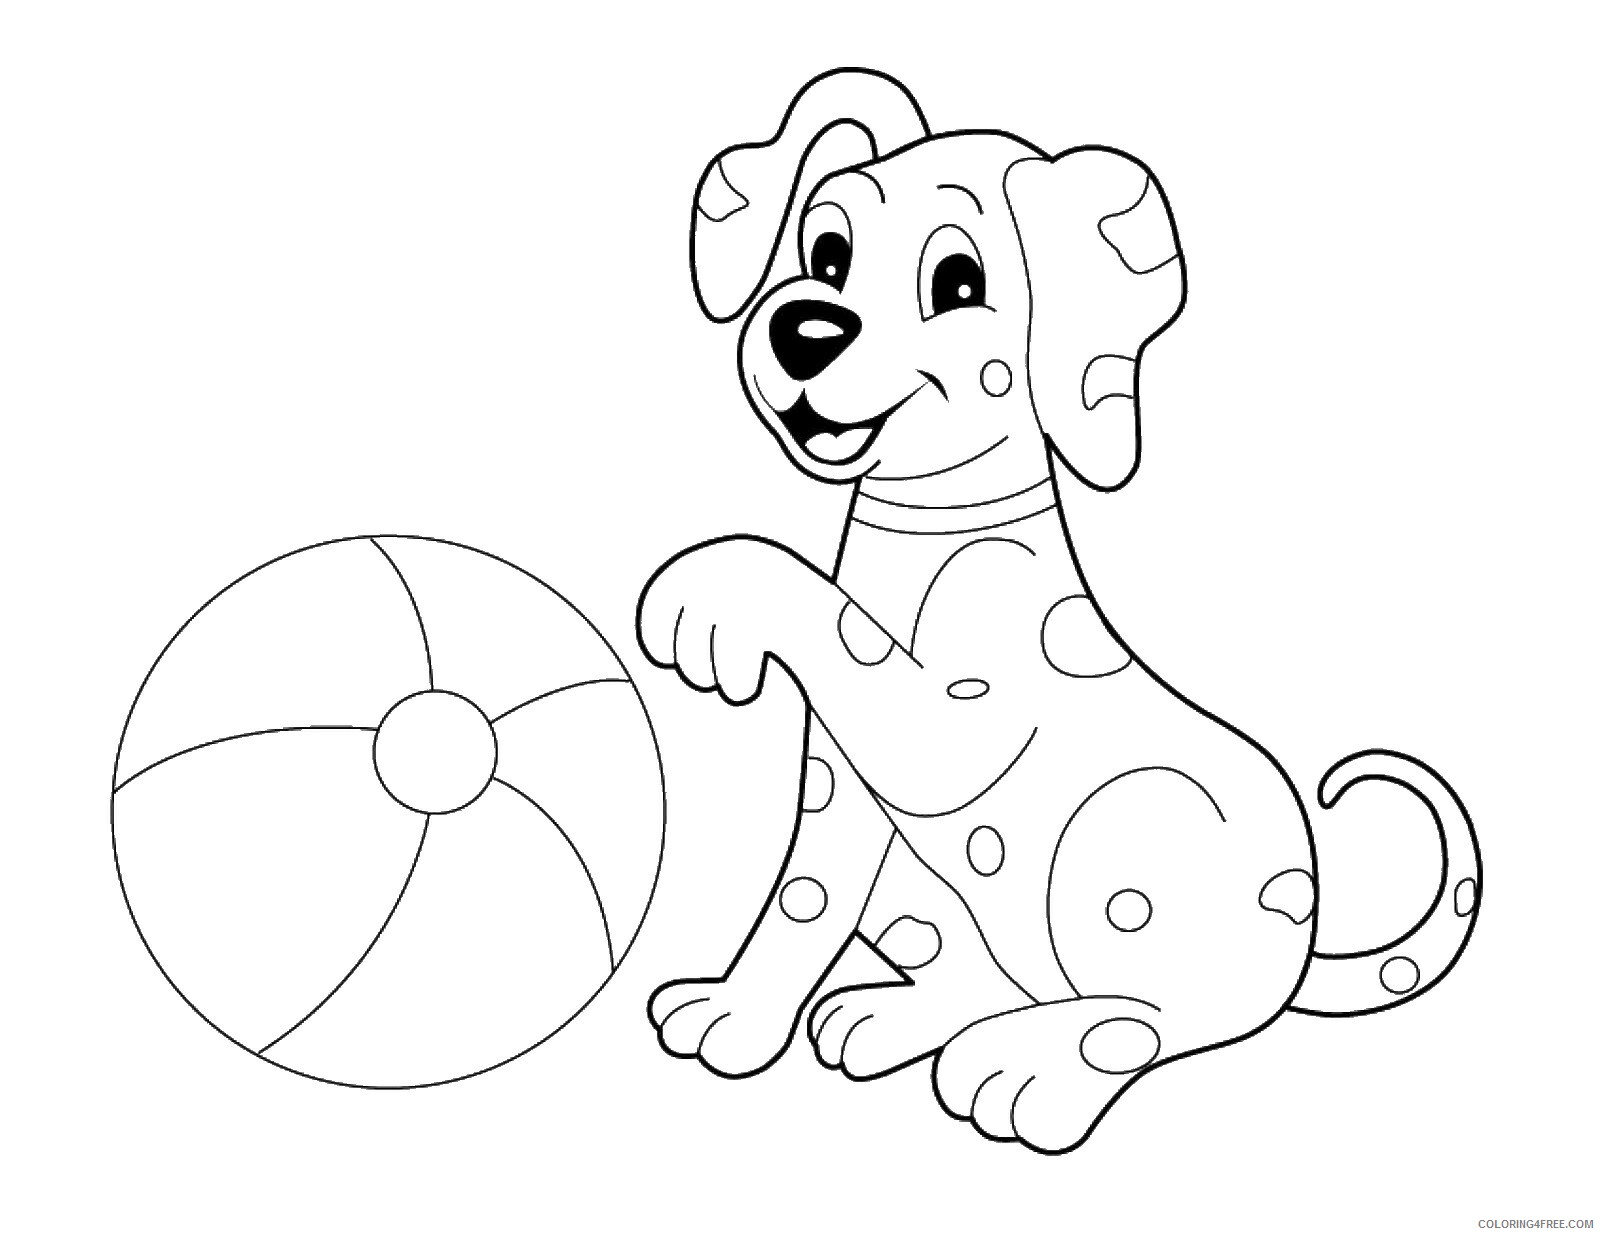 Dogs Coloring Pages Animal Printable Sheets dog_30 2021 1556 Coloring4free